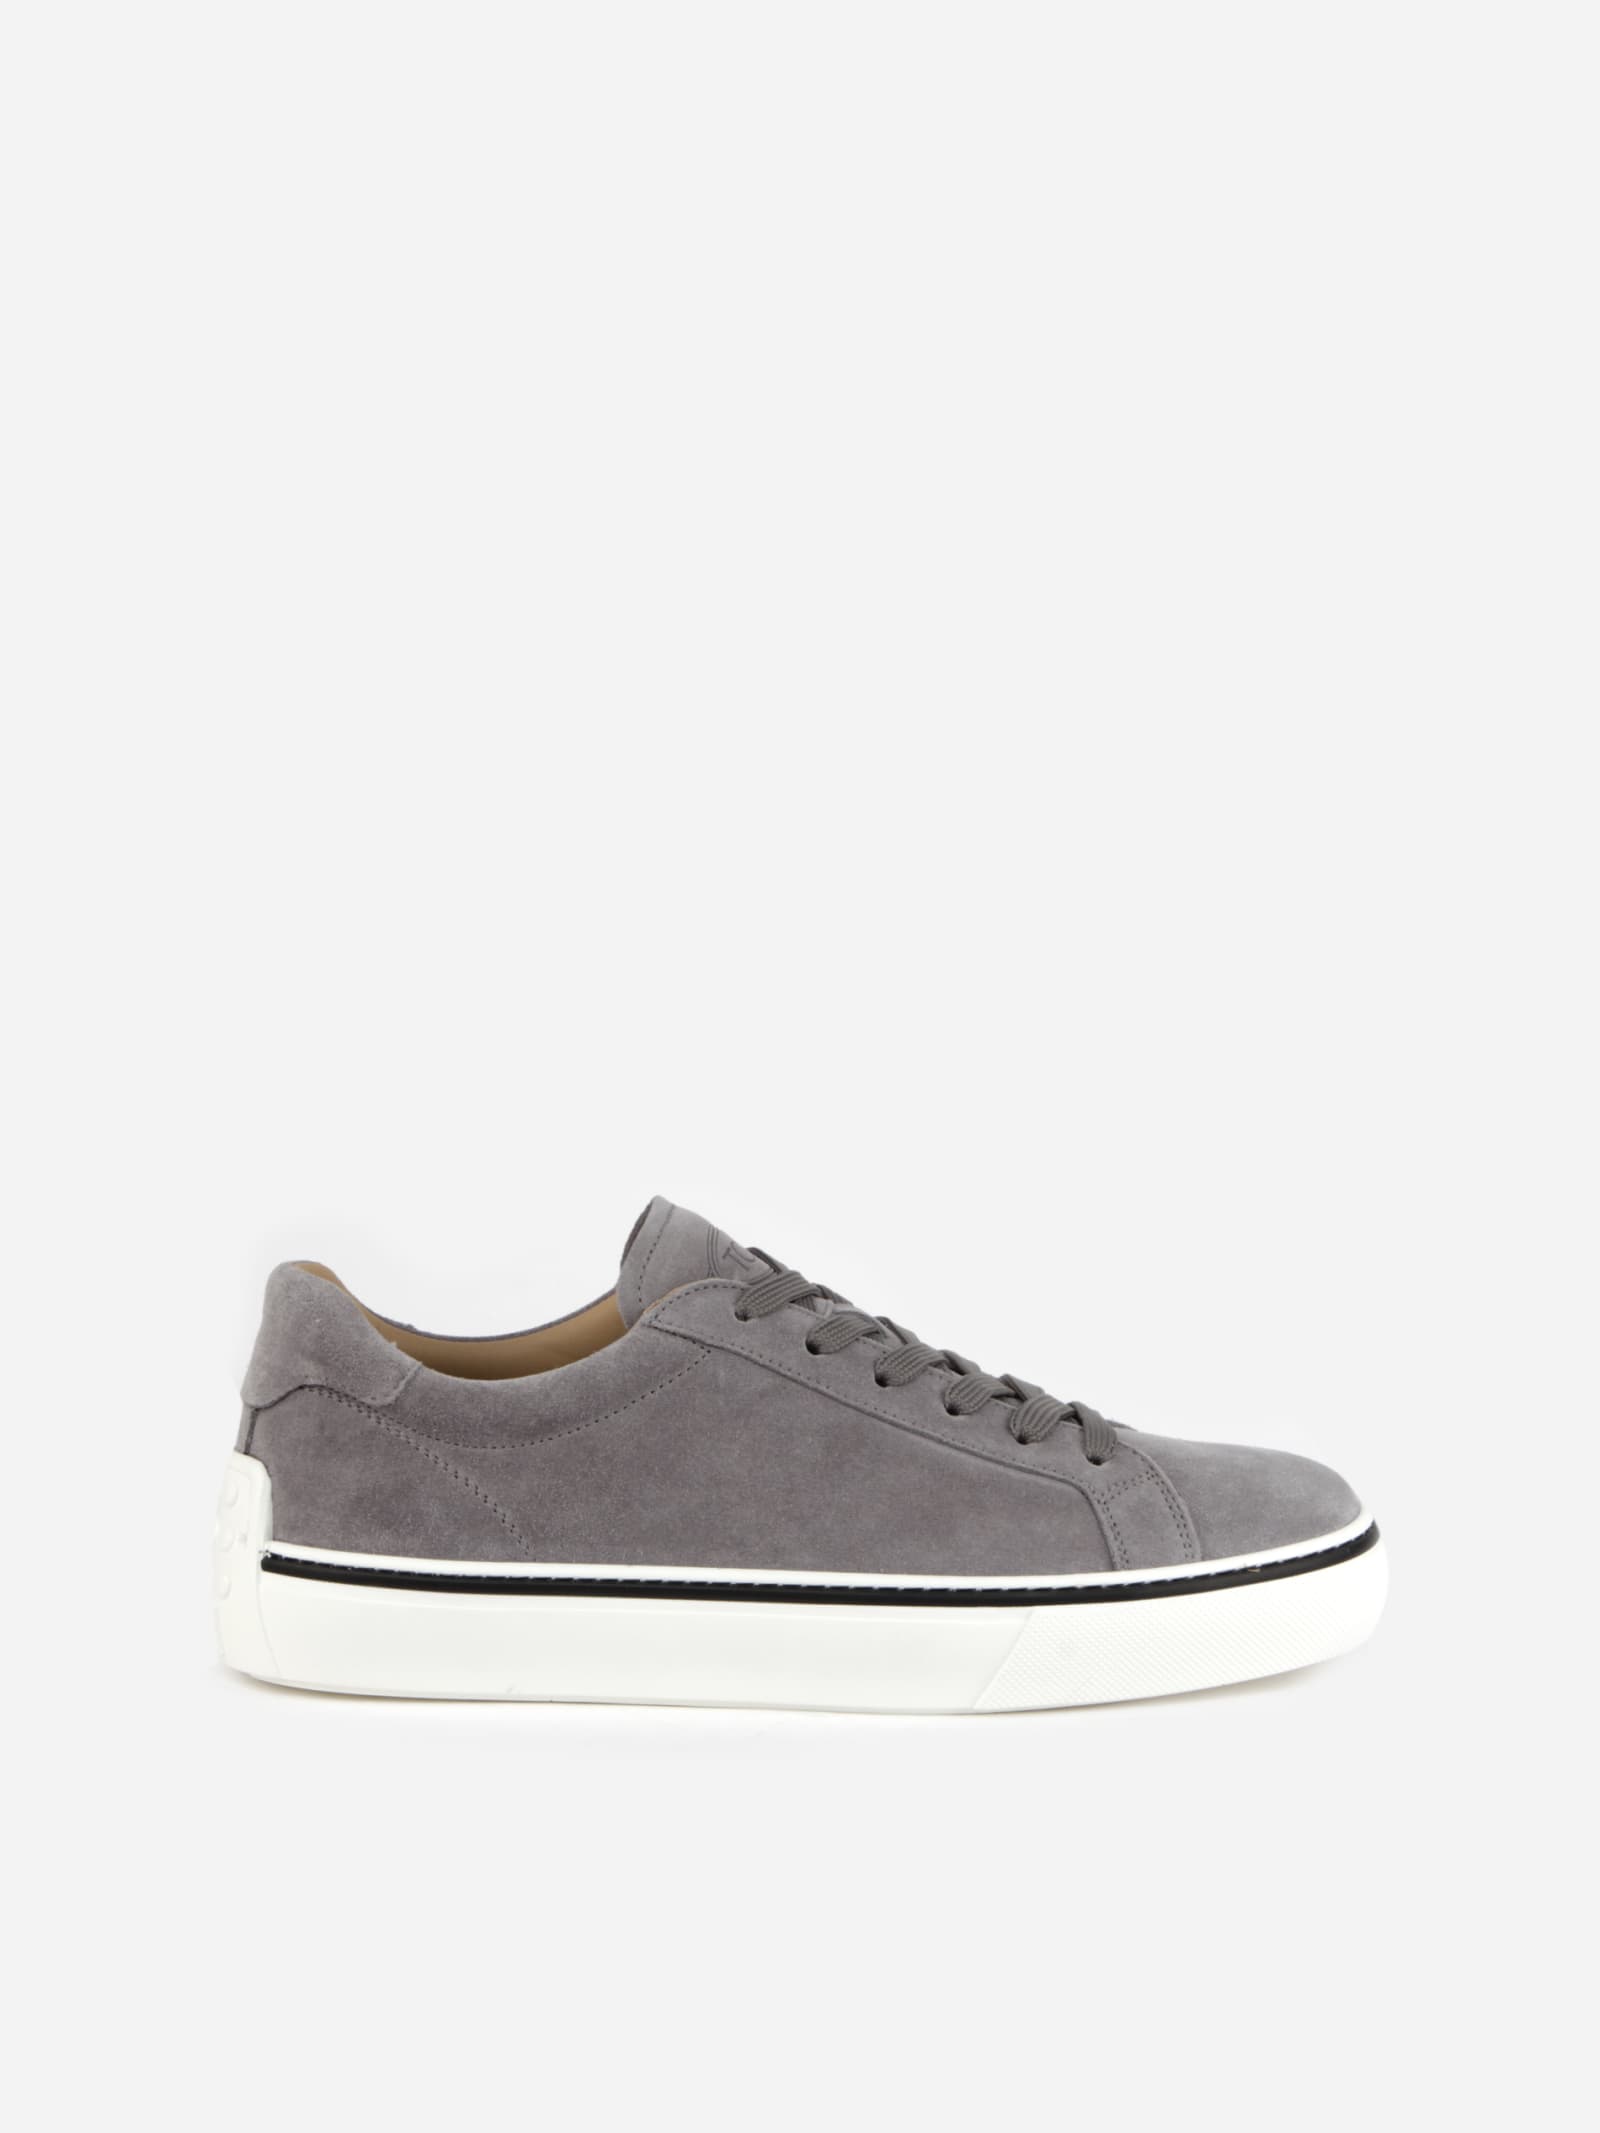 Tods Suede Sneakers With Rubber Detail On The Back